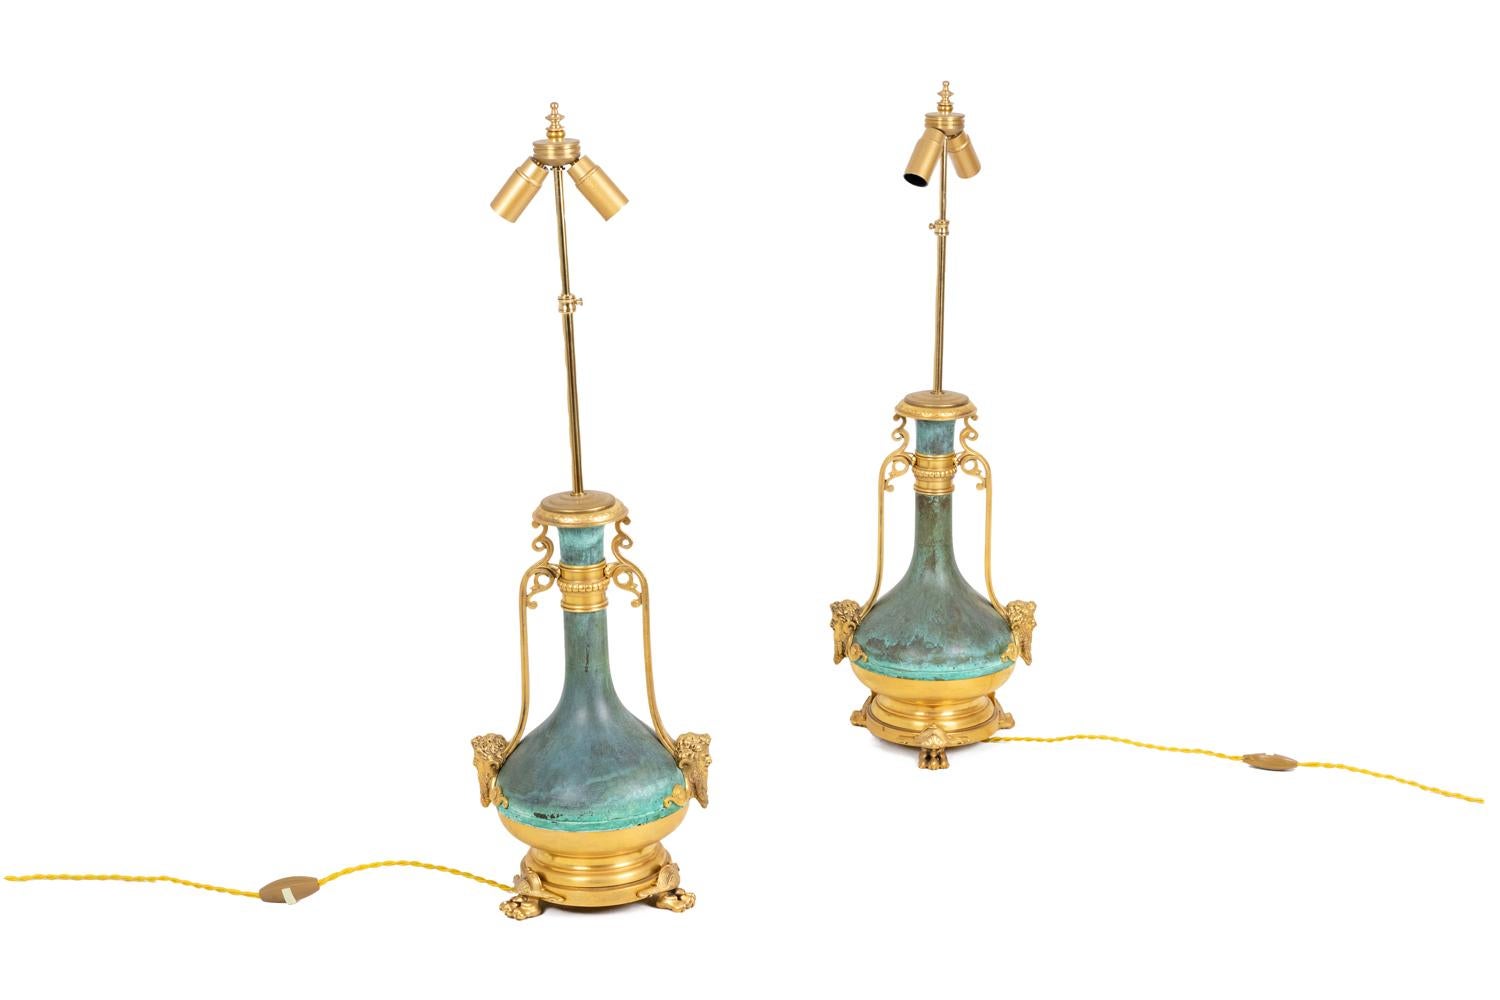 Pair of baluster shape lamps in green patinated and gilt brass.
Neck ring decorated with gadroons on a guilloche background. Two handles on each side in scrolls shape and adorned with faun heads. Circular tripod base with legs in lion paws